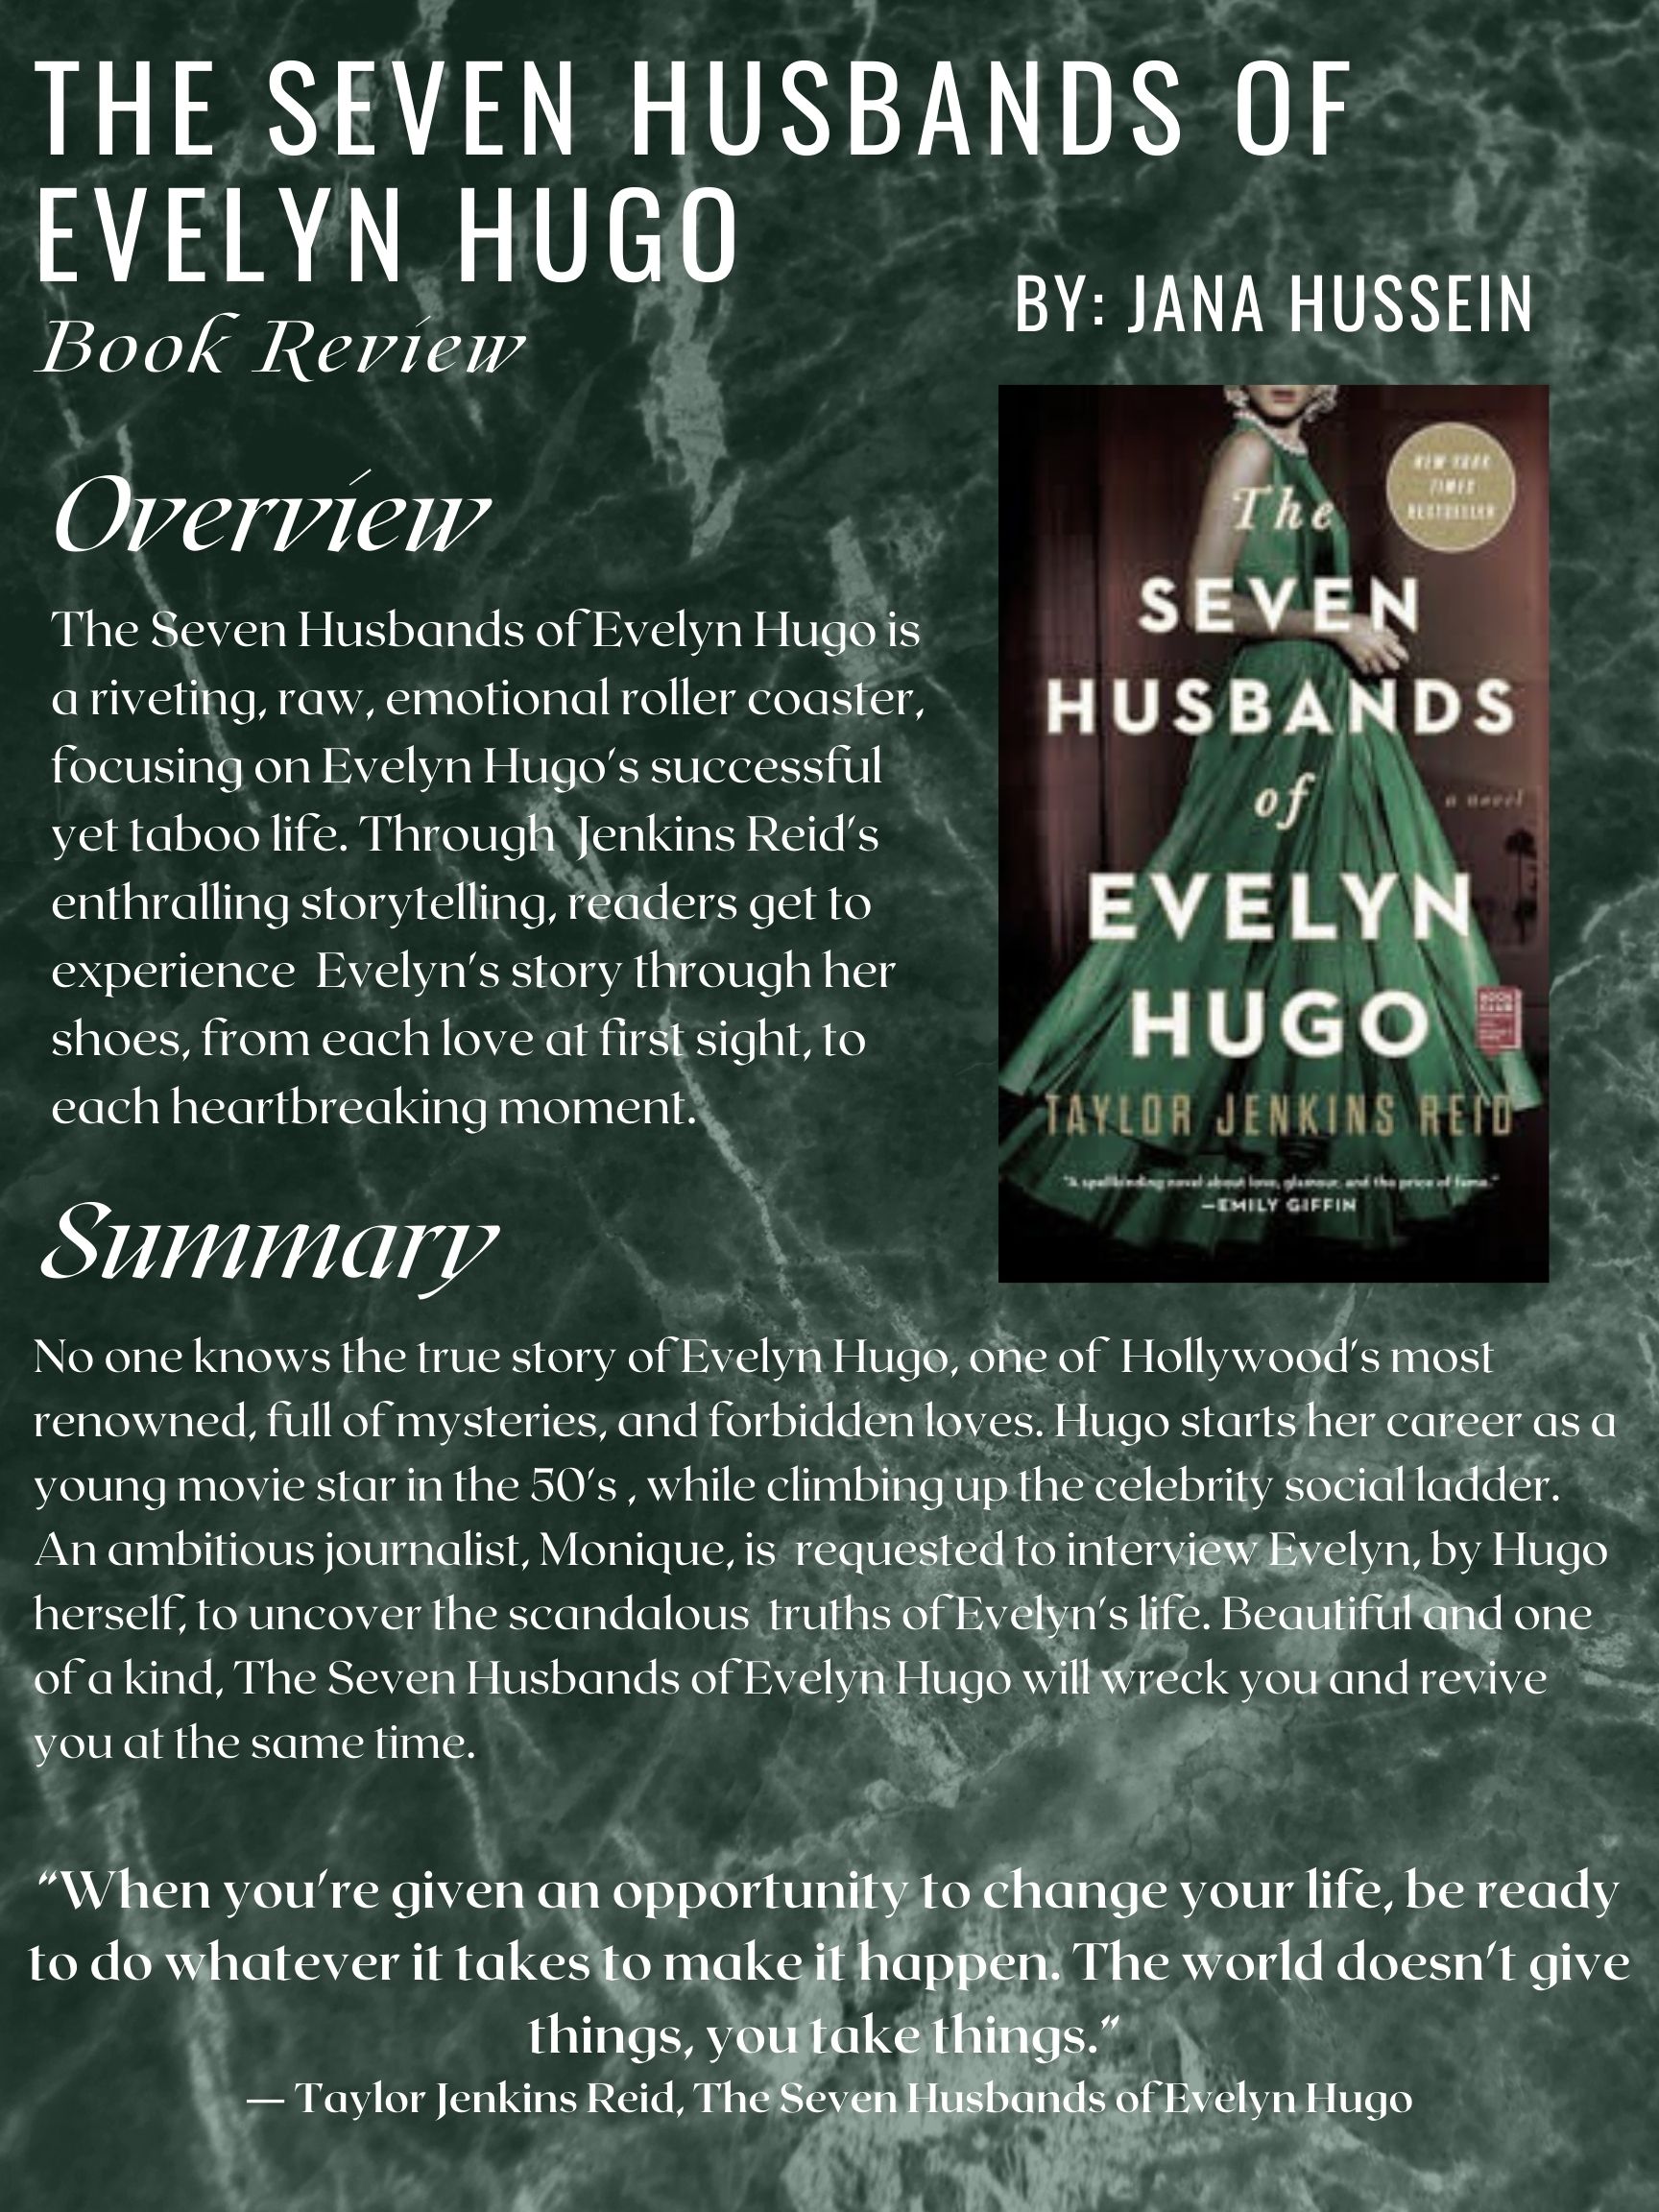 book review of the seven husbands of evelyn hugo